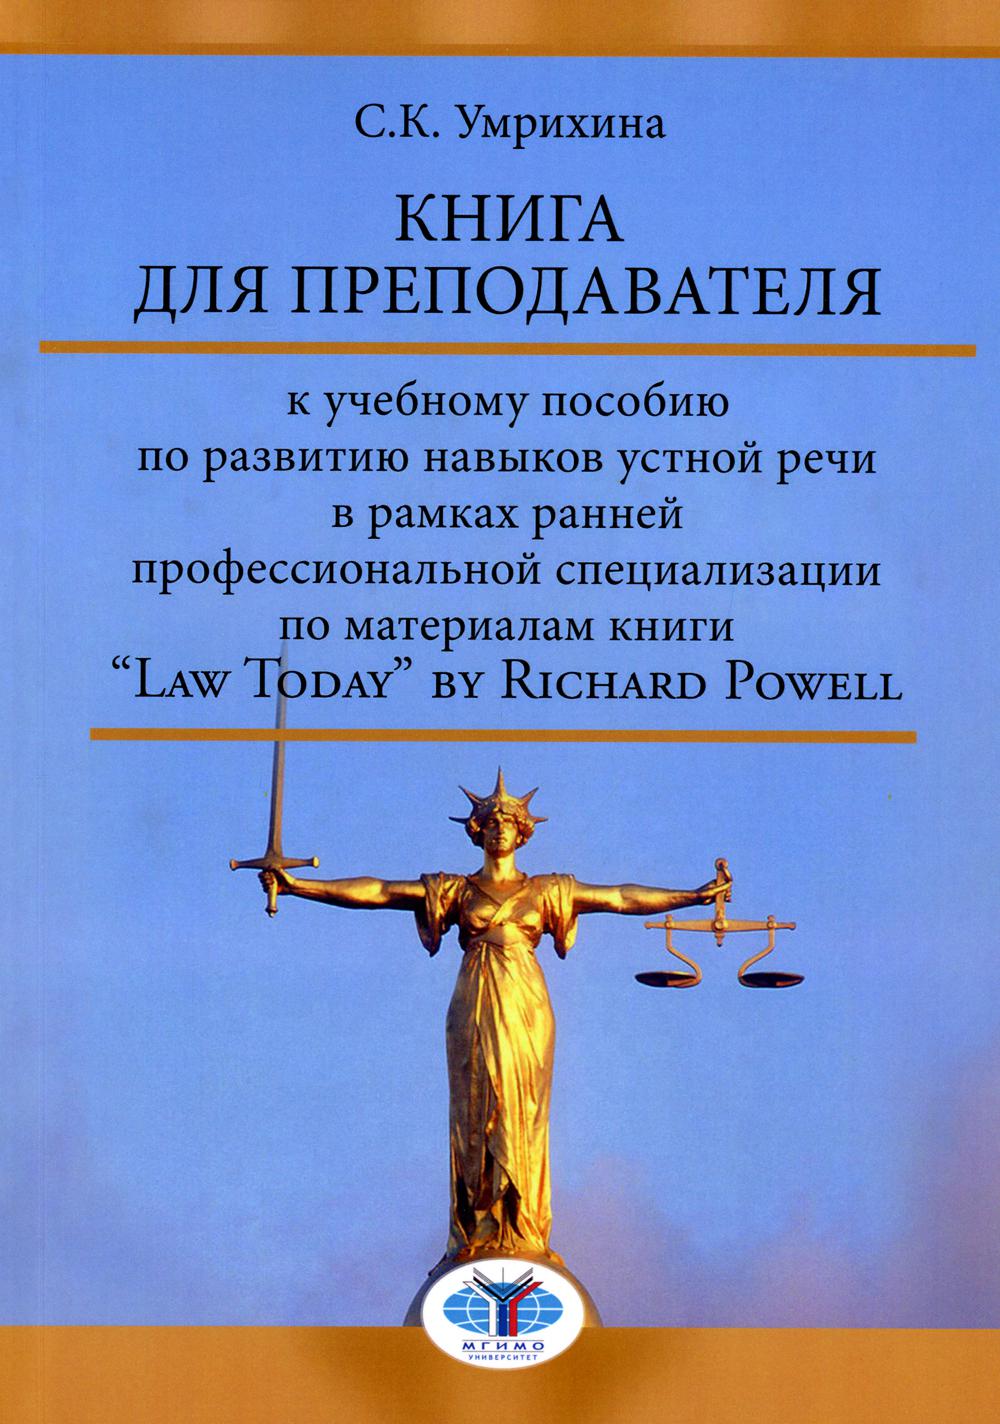                    Law Today by Richard Powell.